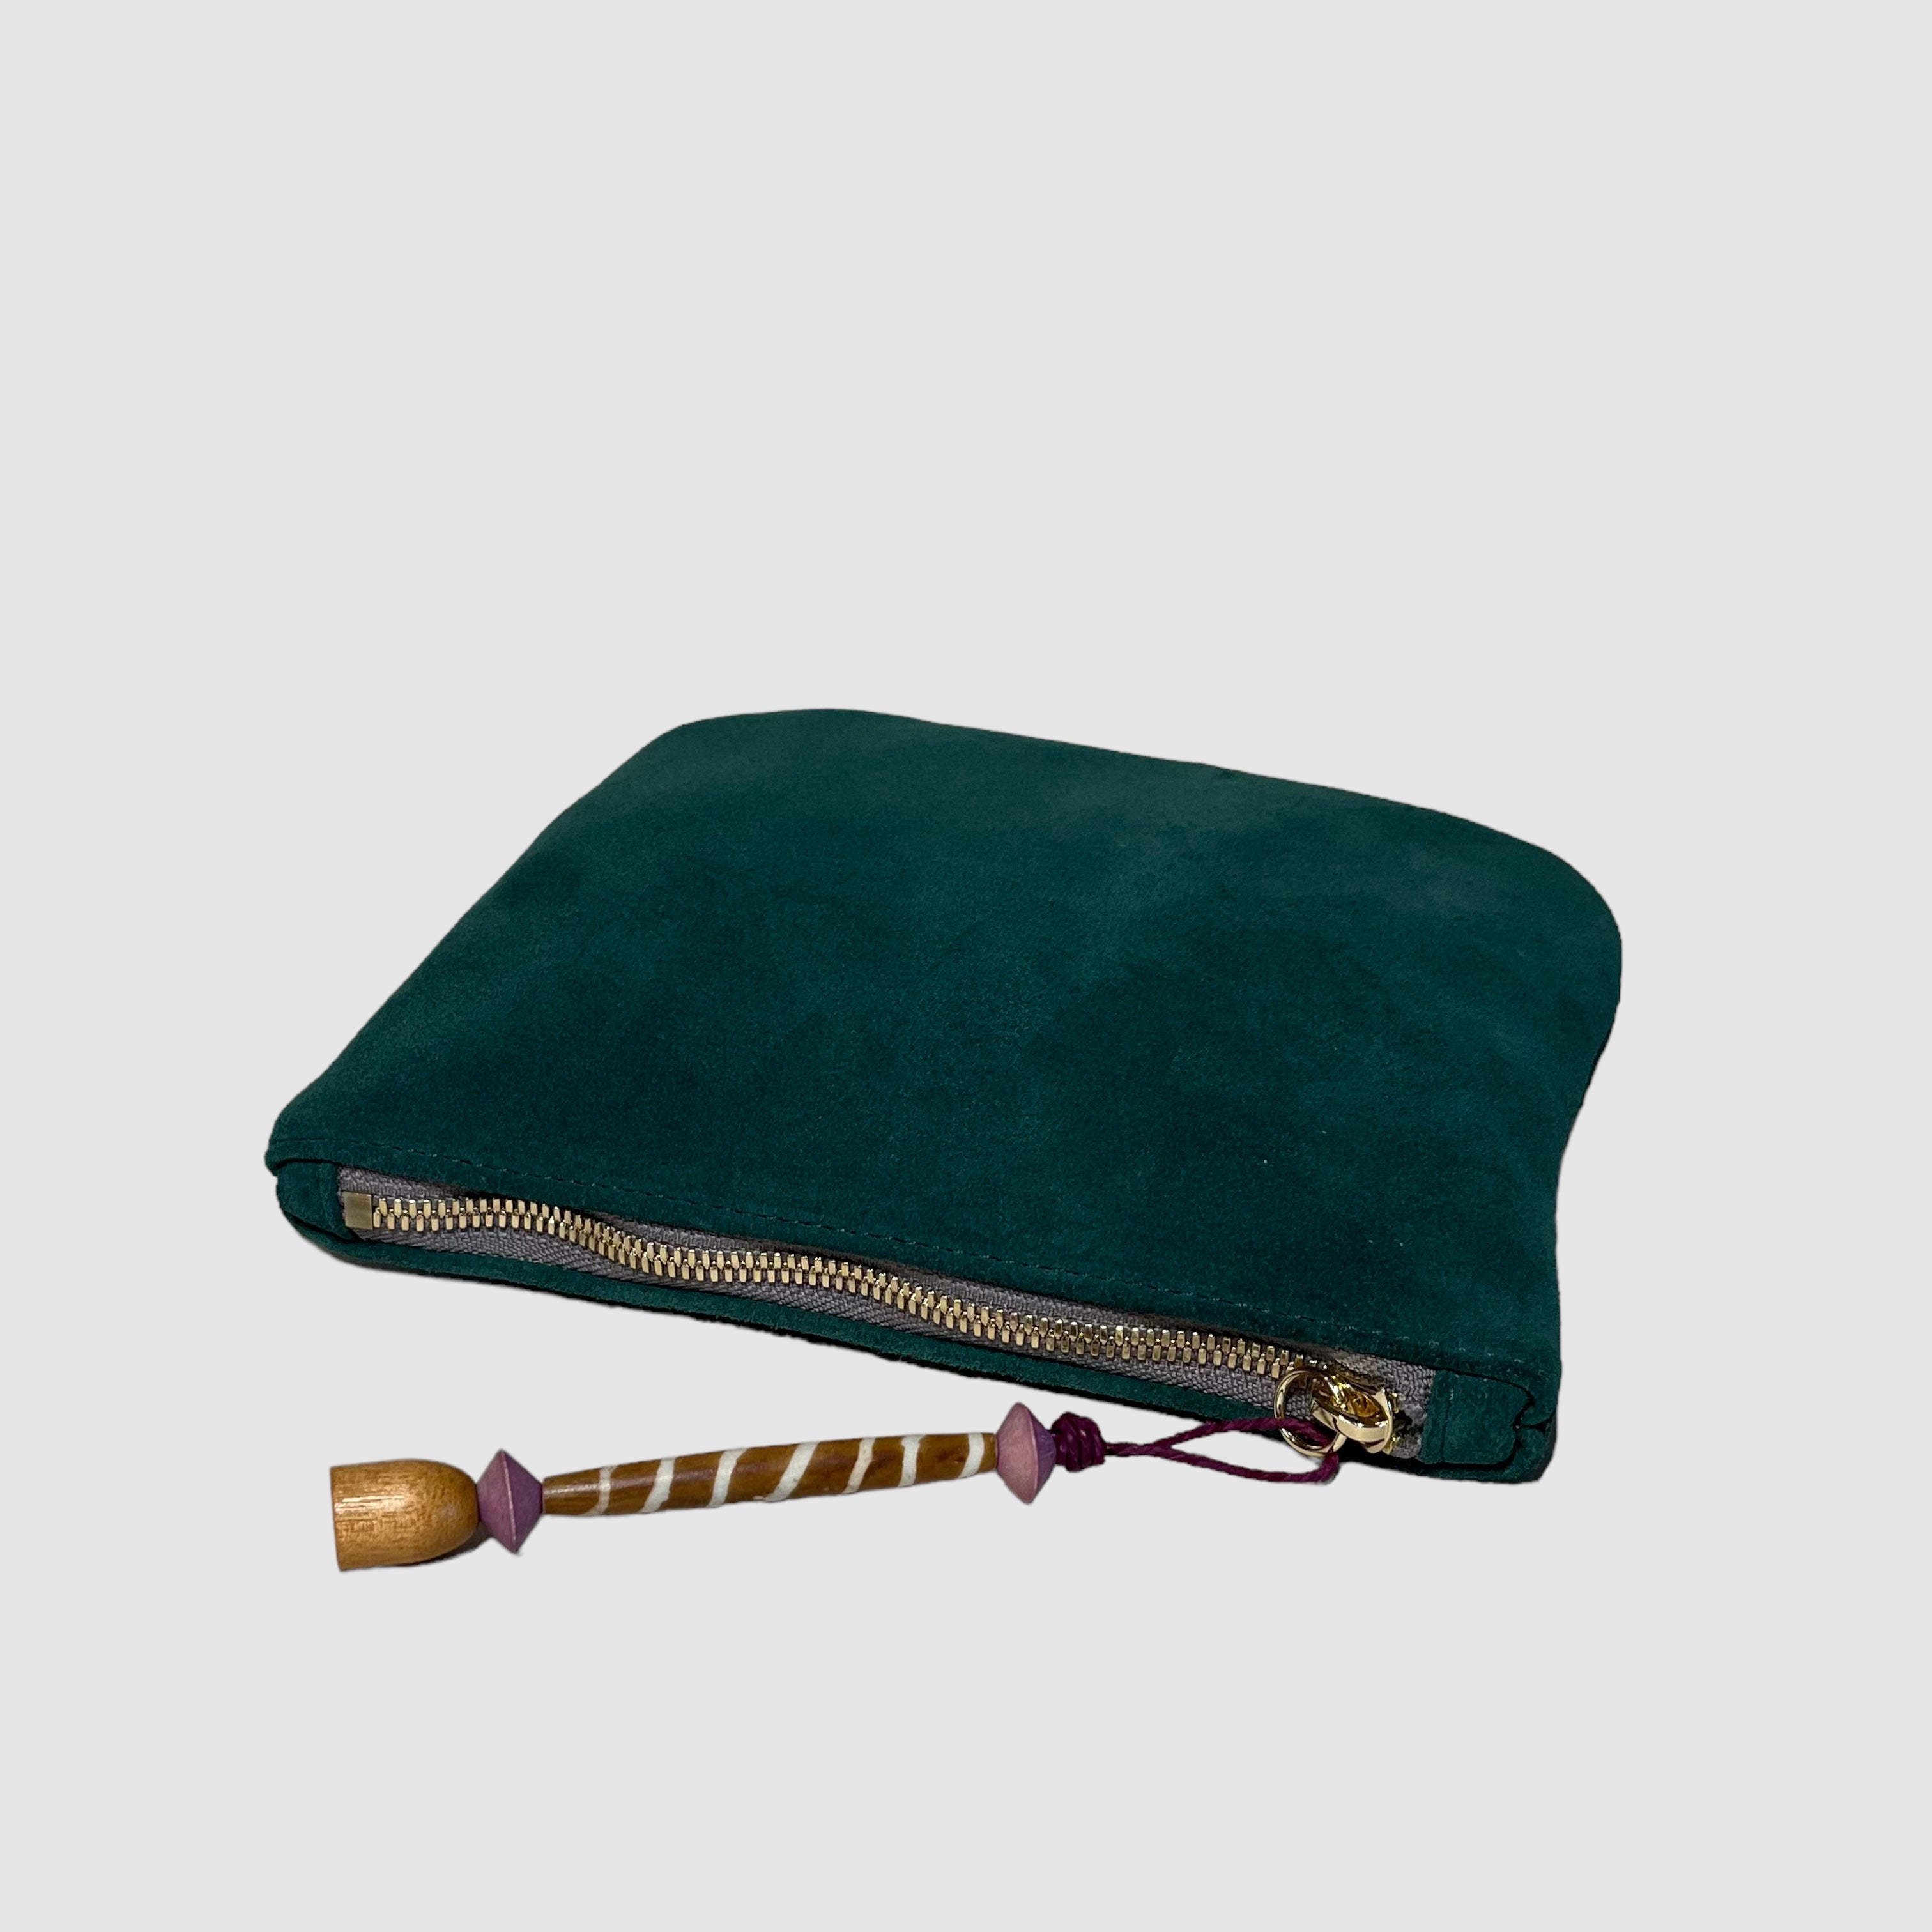 DEEP GREEN CLUTCH // BROWN AND  WHITE GLASS BEAD // SMALL